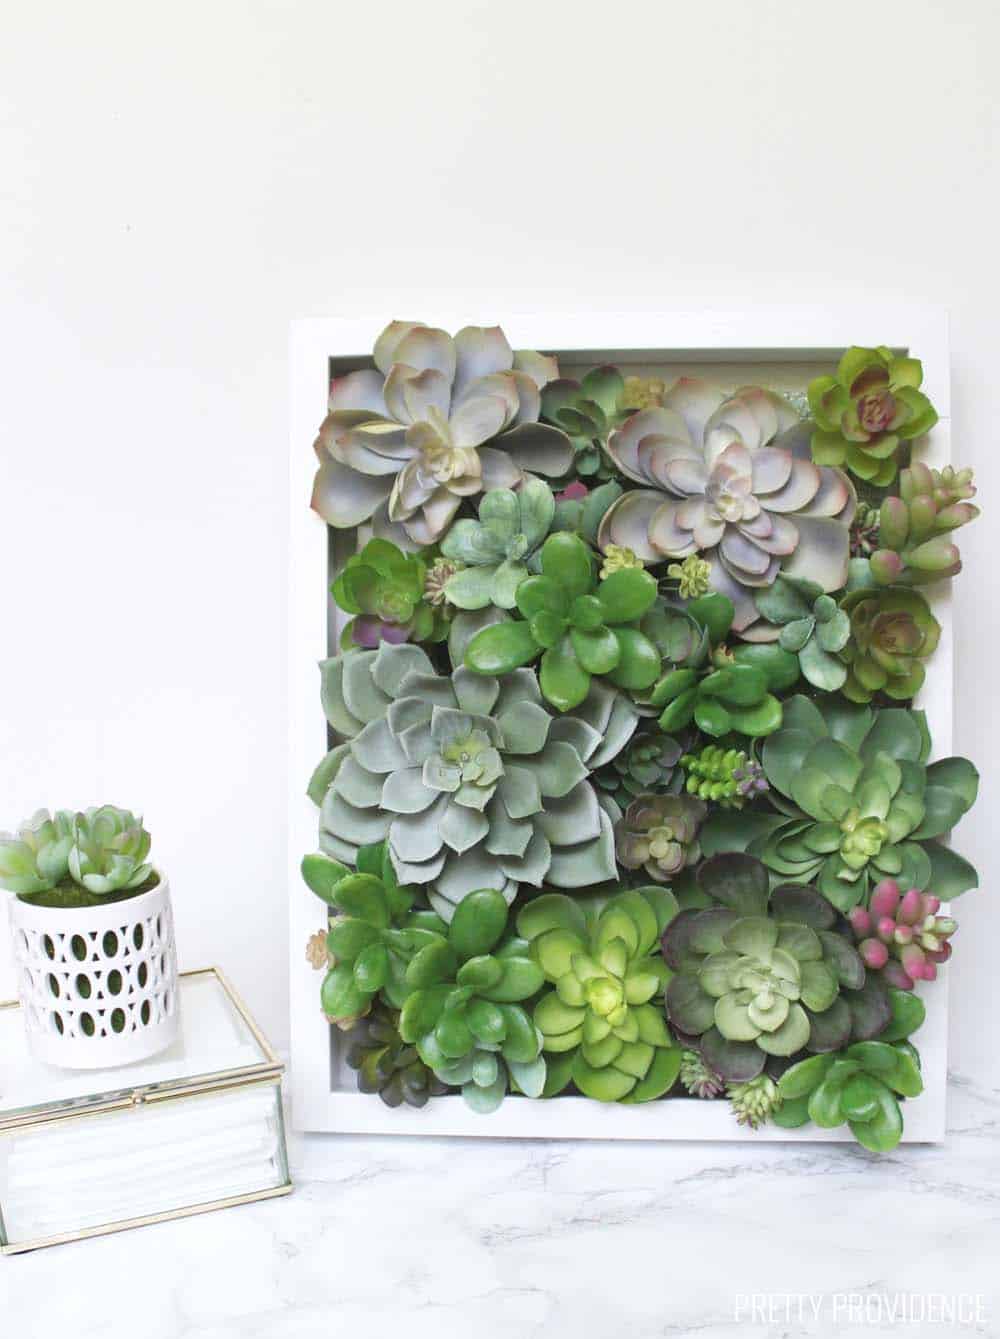 I love decorating with succulents and this easy succulent shadow box decor is perfect! So pretty!